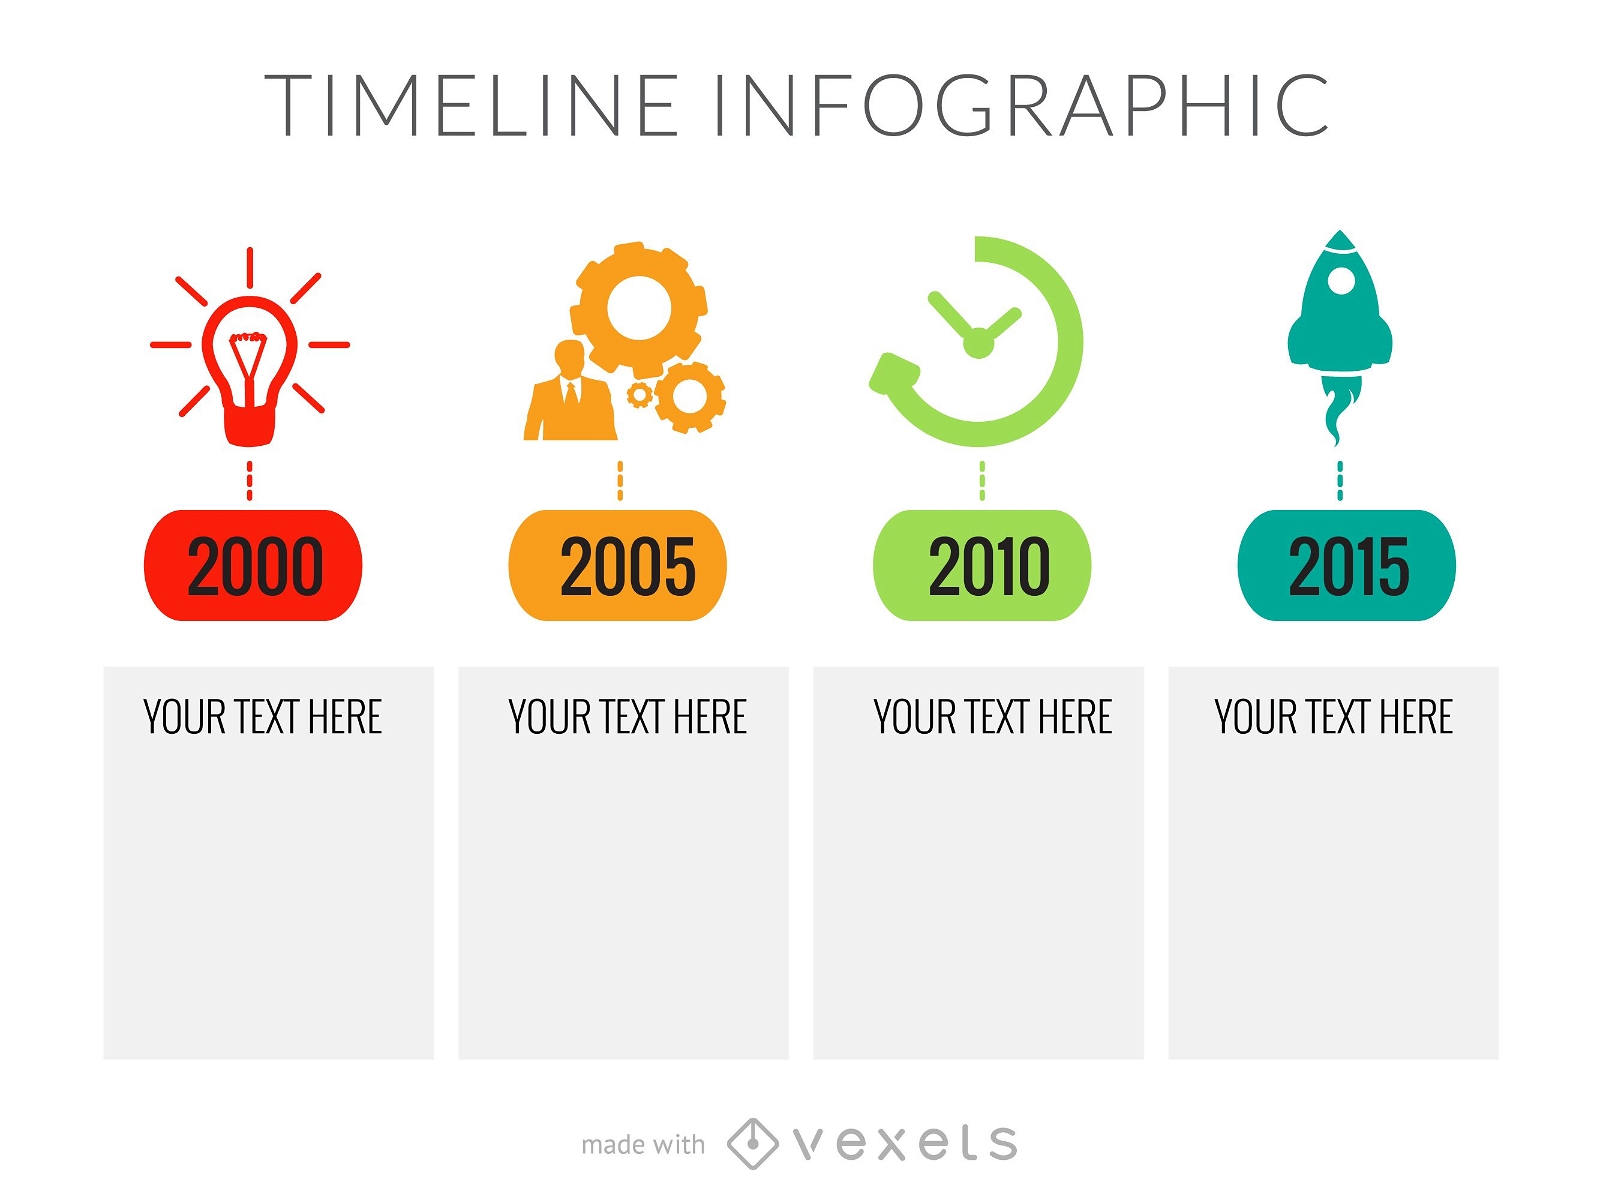 Launch timeline infographic maker